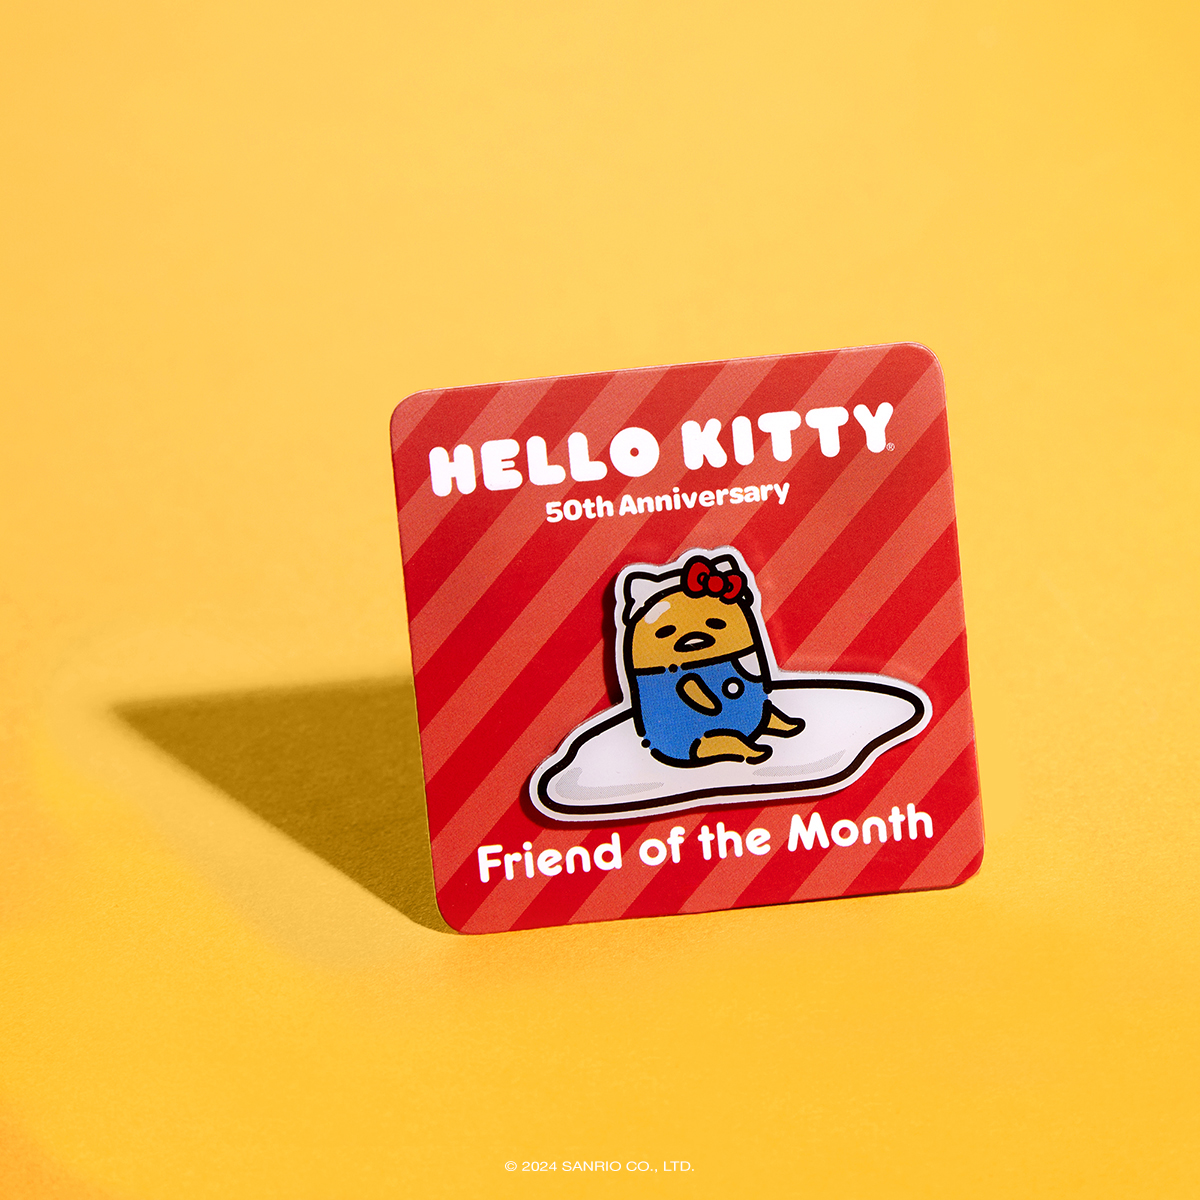 Friend of the Month pins are back! Get our Friend of the Month gift FREE when you spend $50 or more in Sanrio stores and online - no code needed ❤️ Shop now: bit.ly/4bkzdGP